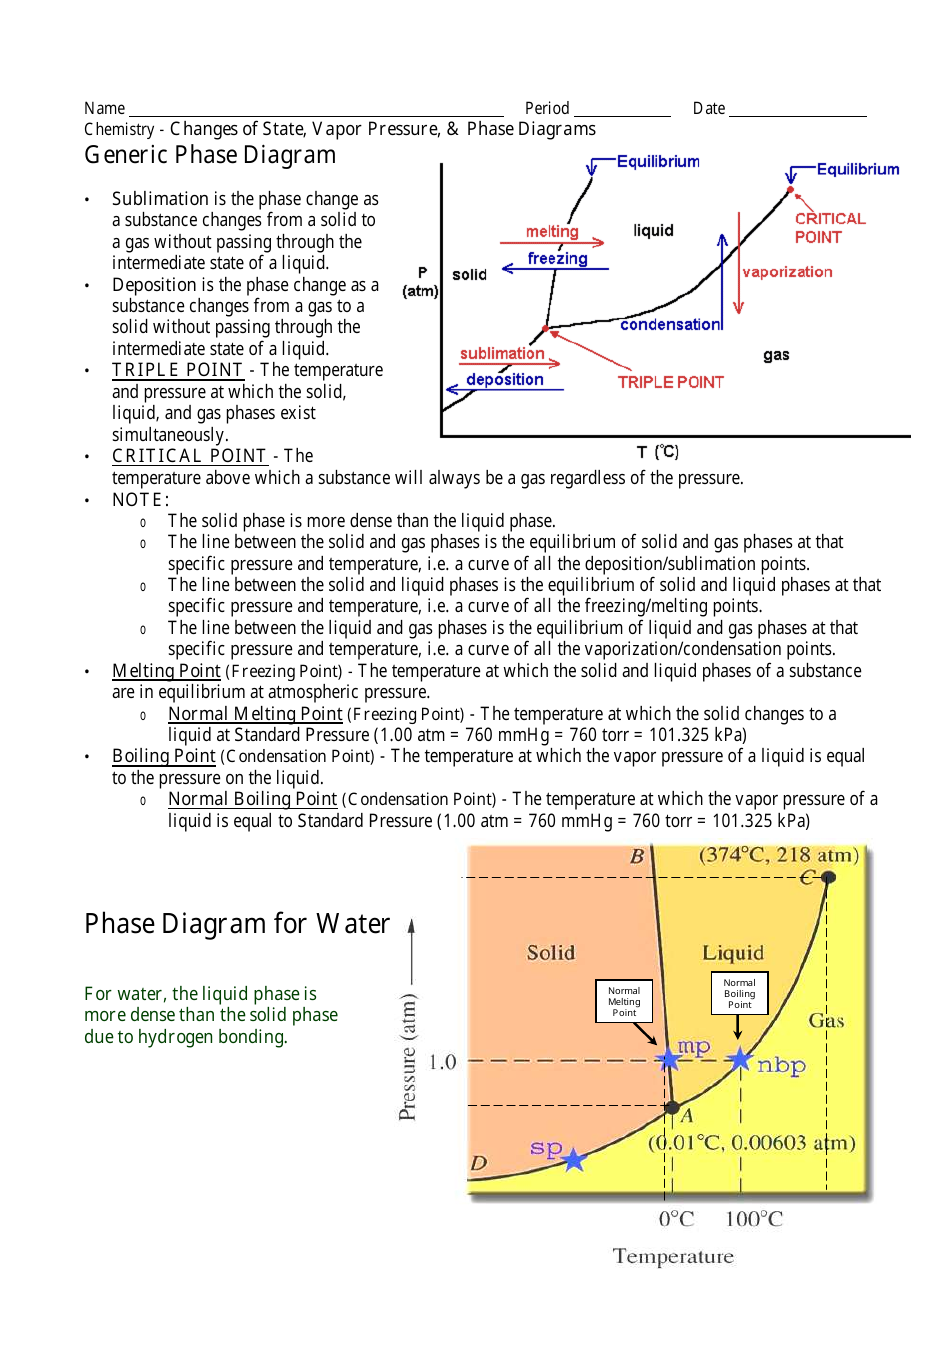 Chemistry Changes of State, Vapor Pressure, & Phase Diagrams Worksheets for 8th Grade